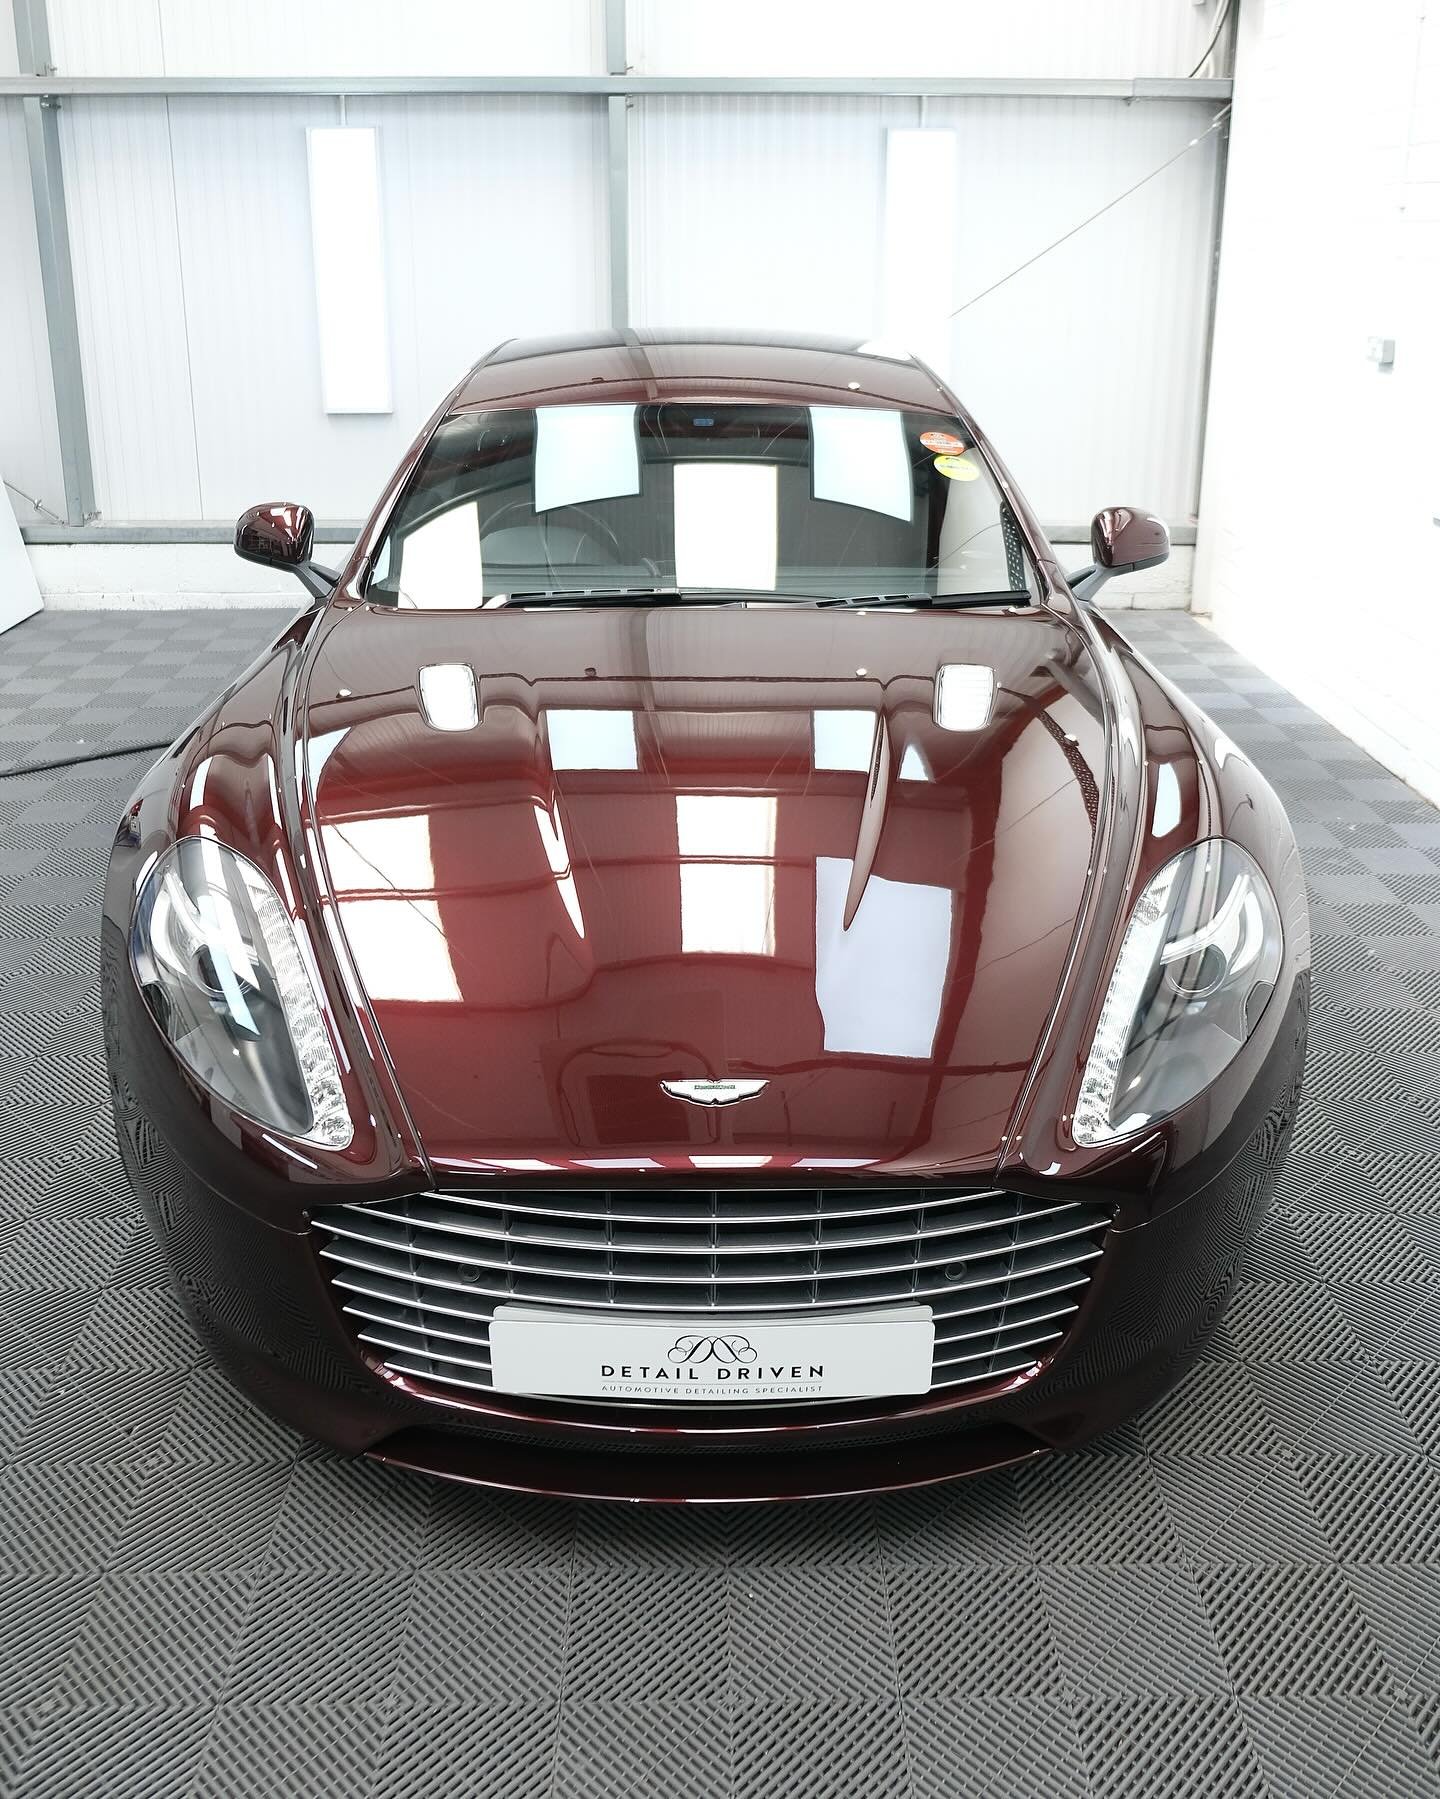 Aston Martin Rapide S after we installed our extended front PPF kit. A car we&rsquo;ve seen a few times before, returned this time after some recent paintwork to repair stone chips and road rash, for PPF to prevent it from happening again. Edited tem